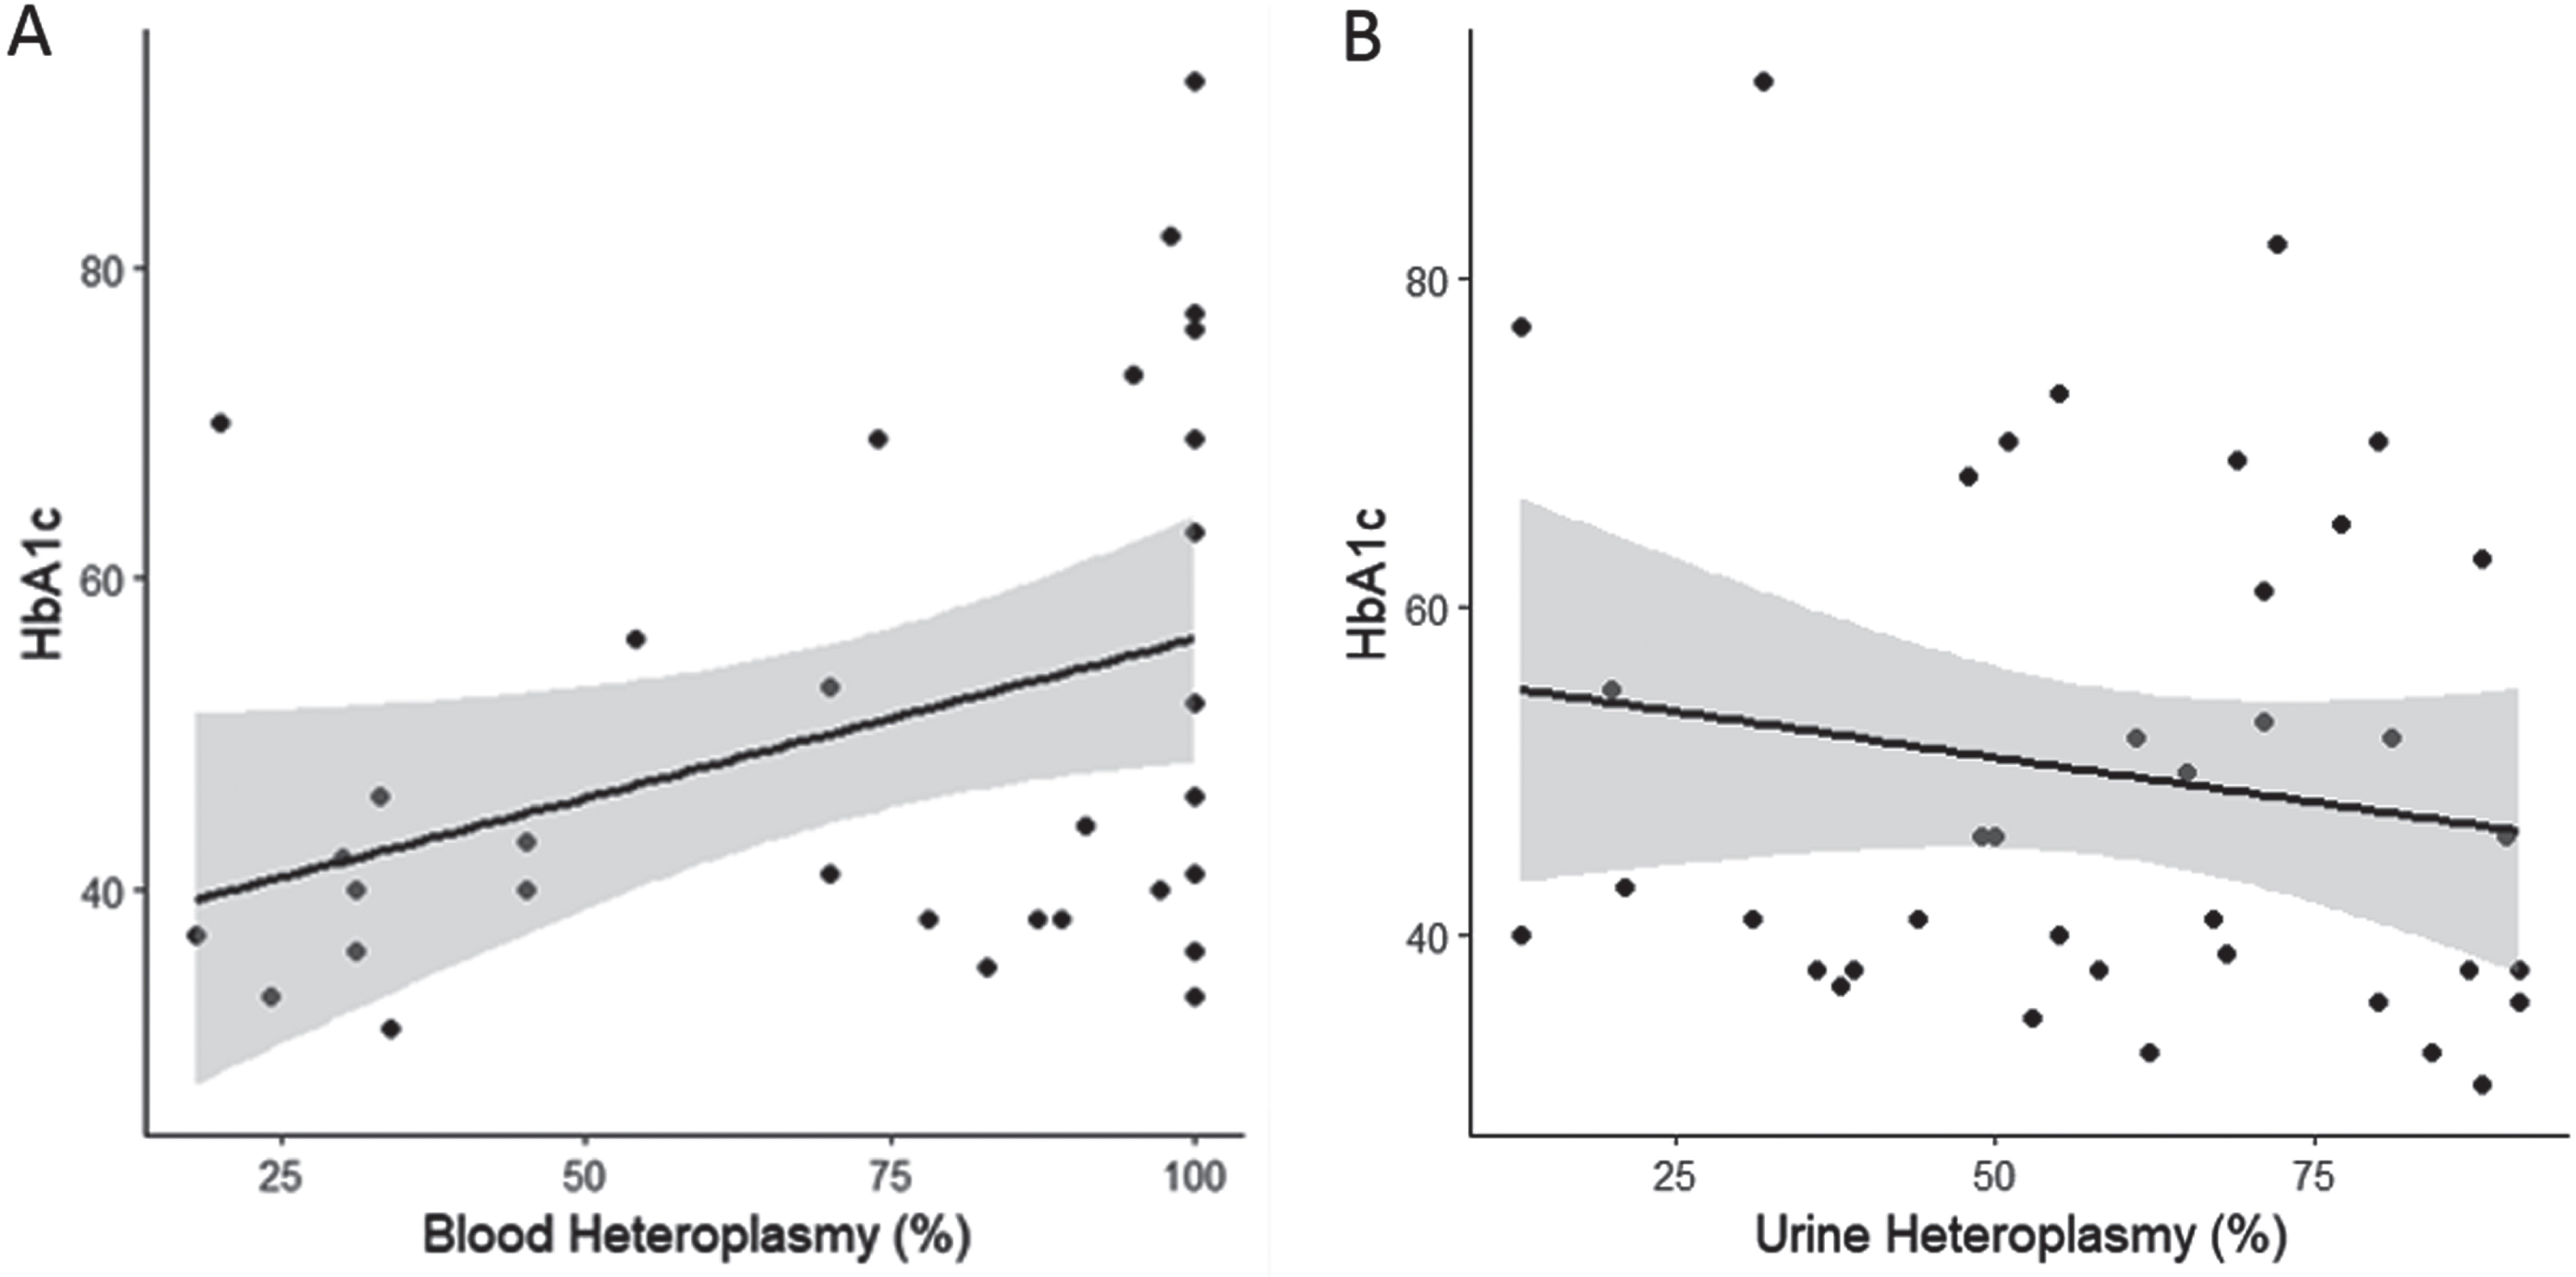 The association between HbA1c with A) corrected blood heteroplasmy load (n = 32), and B) urinary heteroplasmy load (n = 39). Shaded areas represesnt 95% confidence intervals.